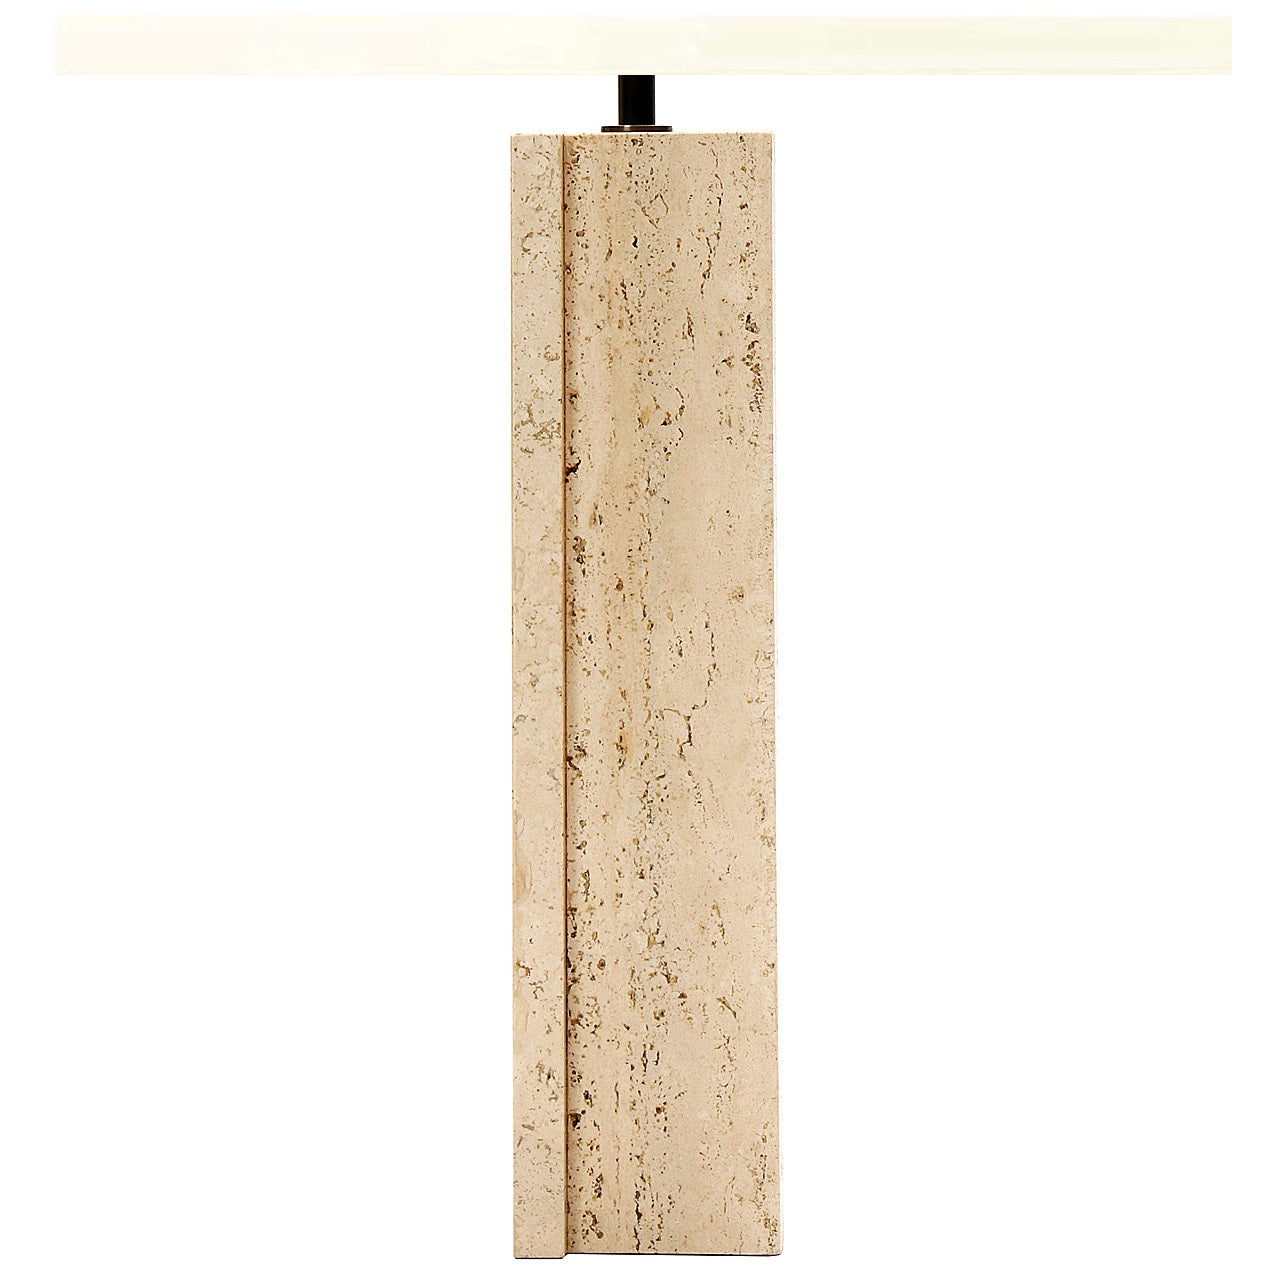 A square-columned table lamp made from overlapping travertine slabs.